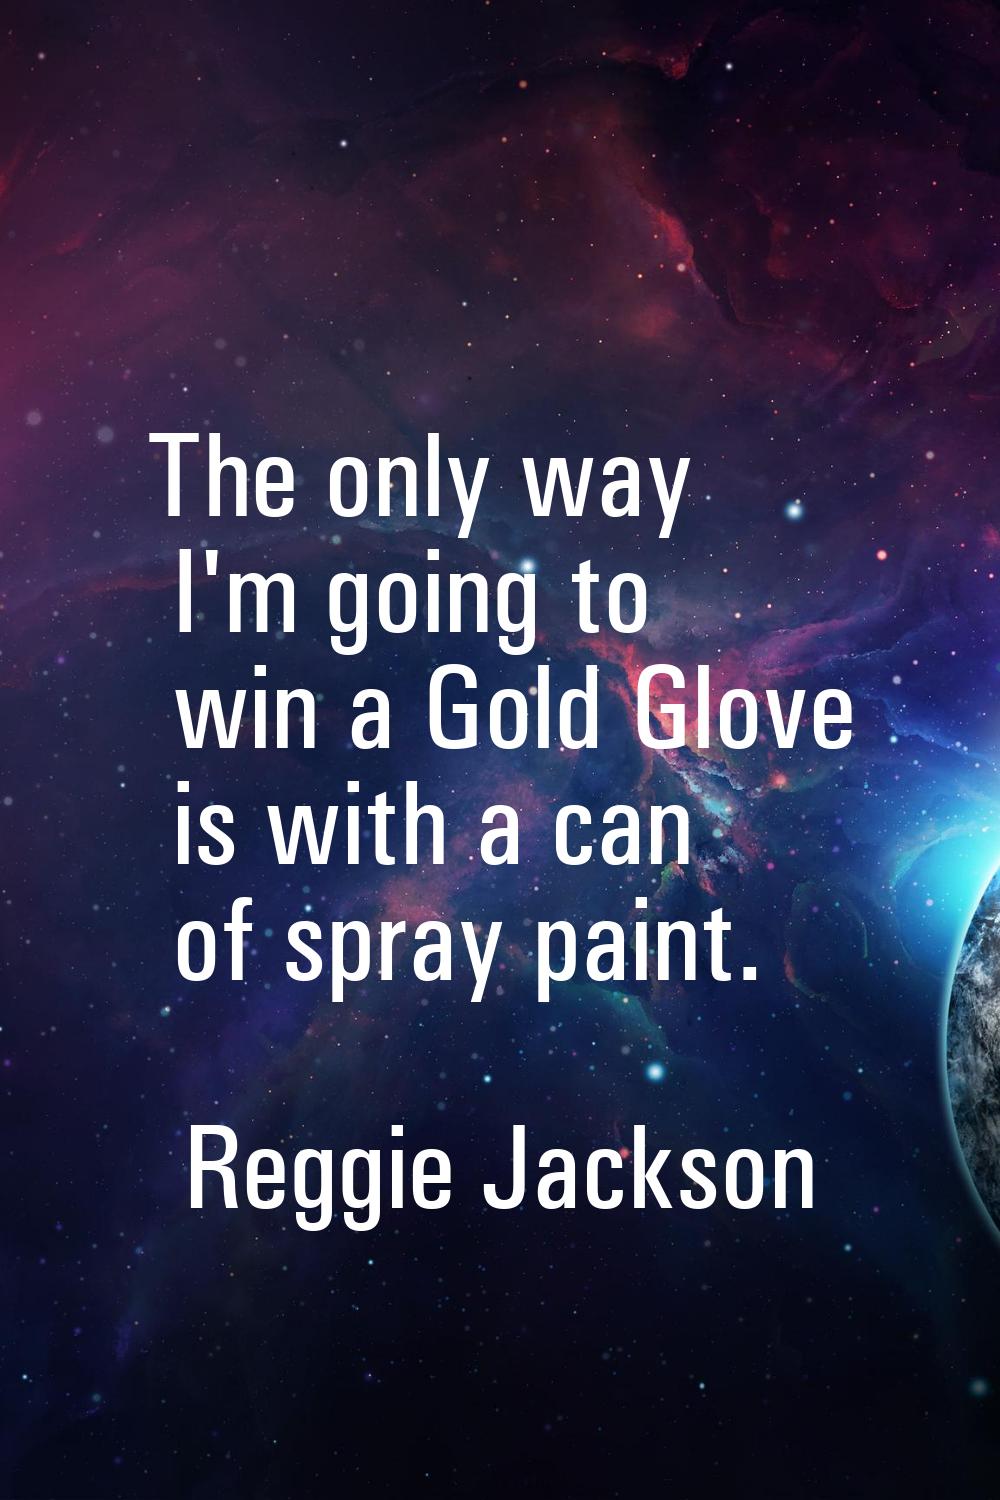 The only way I'm going to win a Gold Glove is with a can of spray paint.